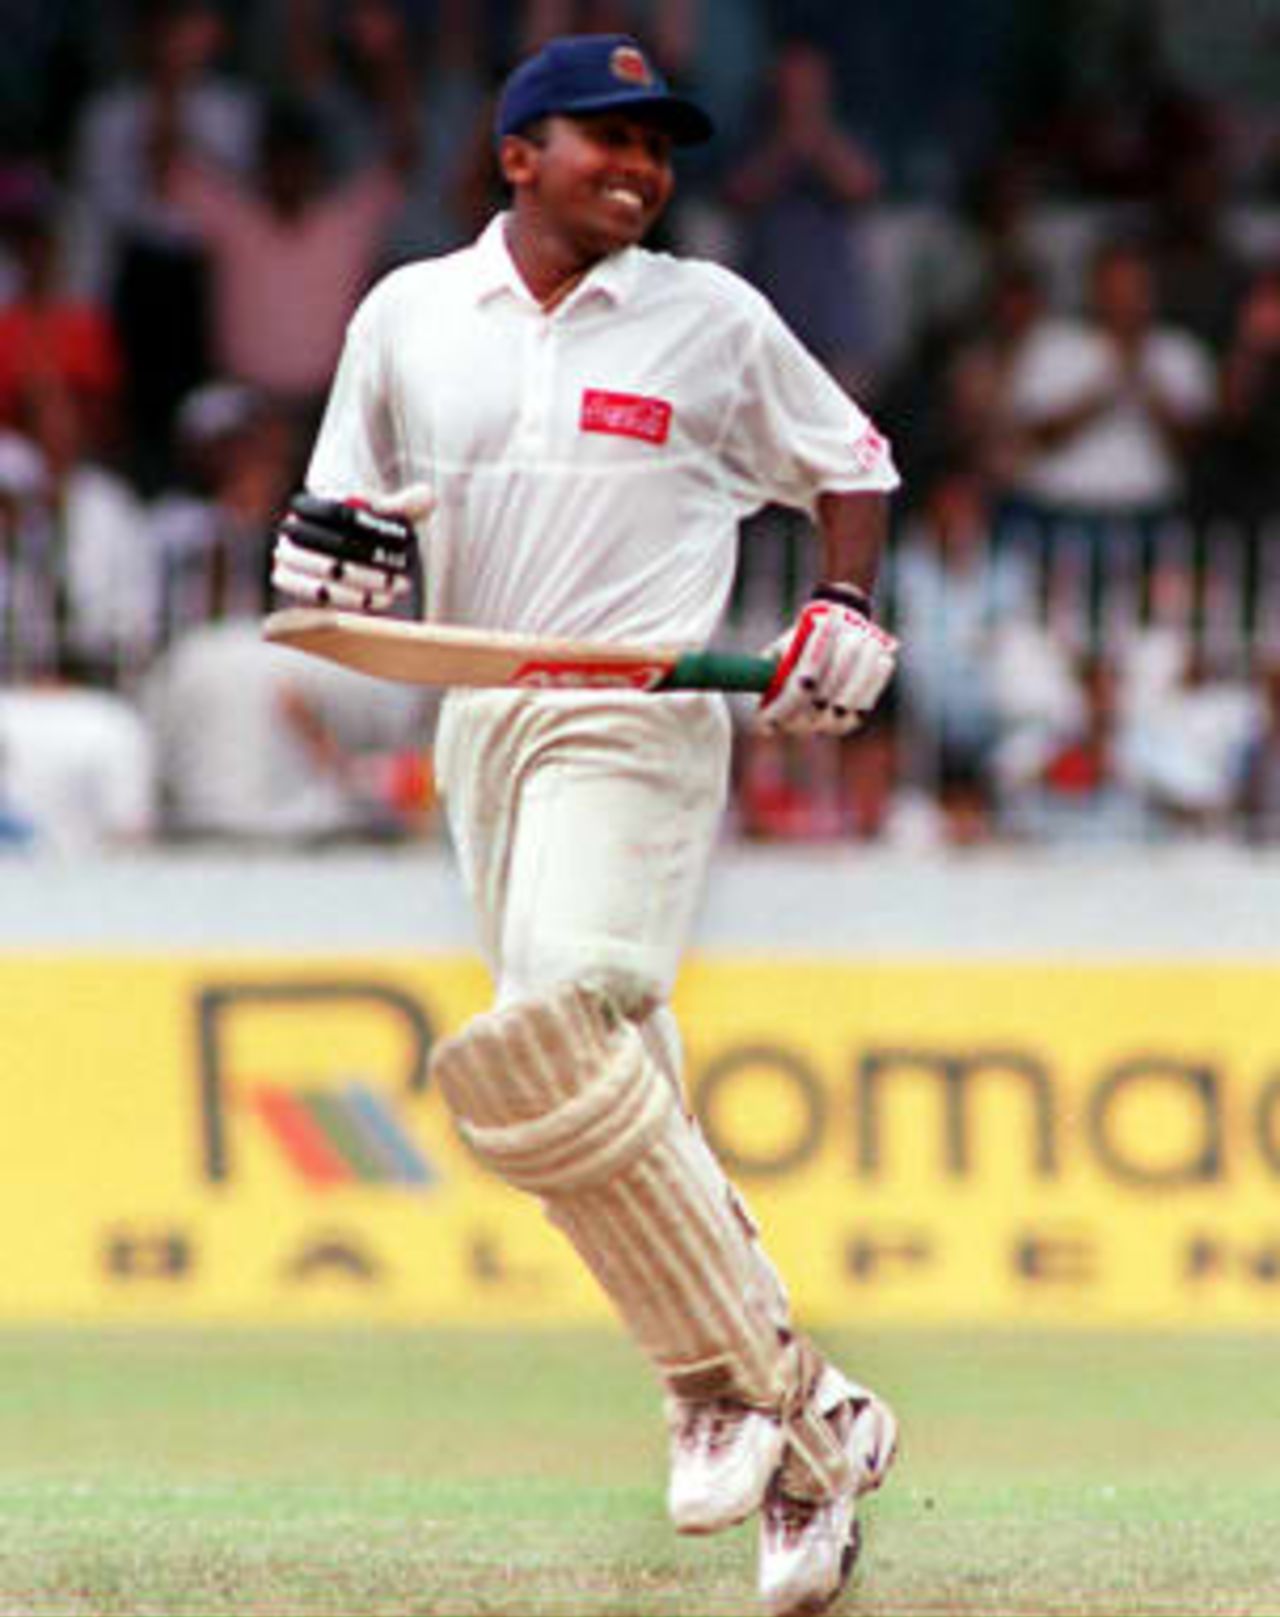 Jayawardene is all smiles as he reaches 200 - Asian Test Championship, 1998/99, 2nd Match Sri Lanka v India Sinhalese Sports Club, Colombo 27 Feb 1999